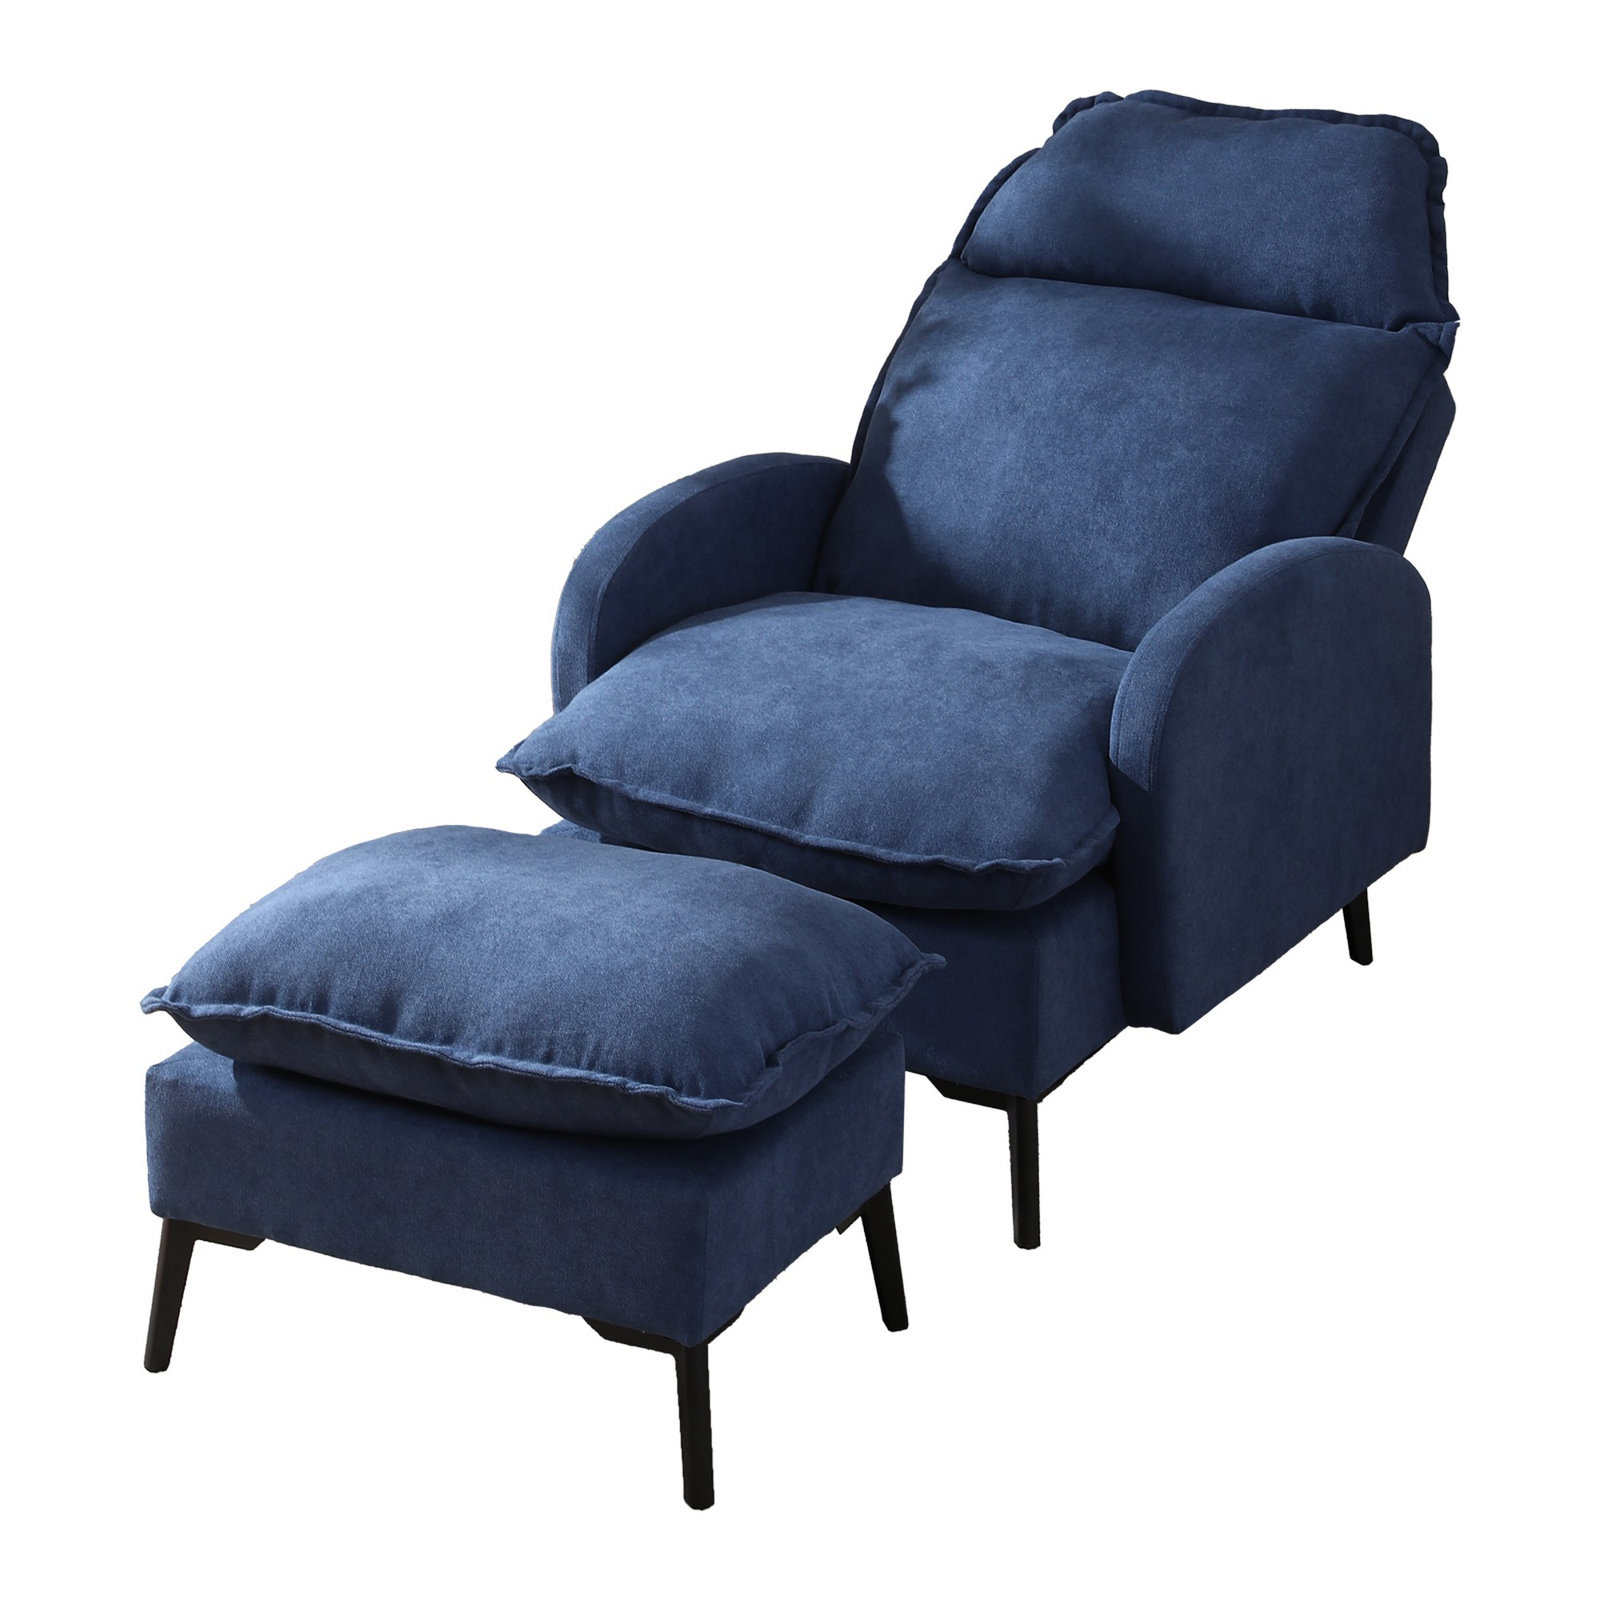 Infinity Upholstered Recliner with Ottoman